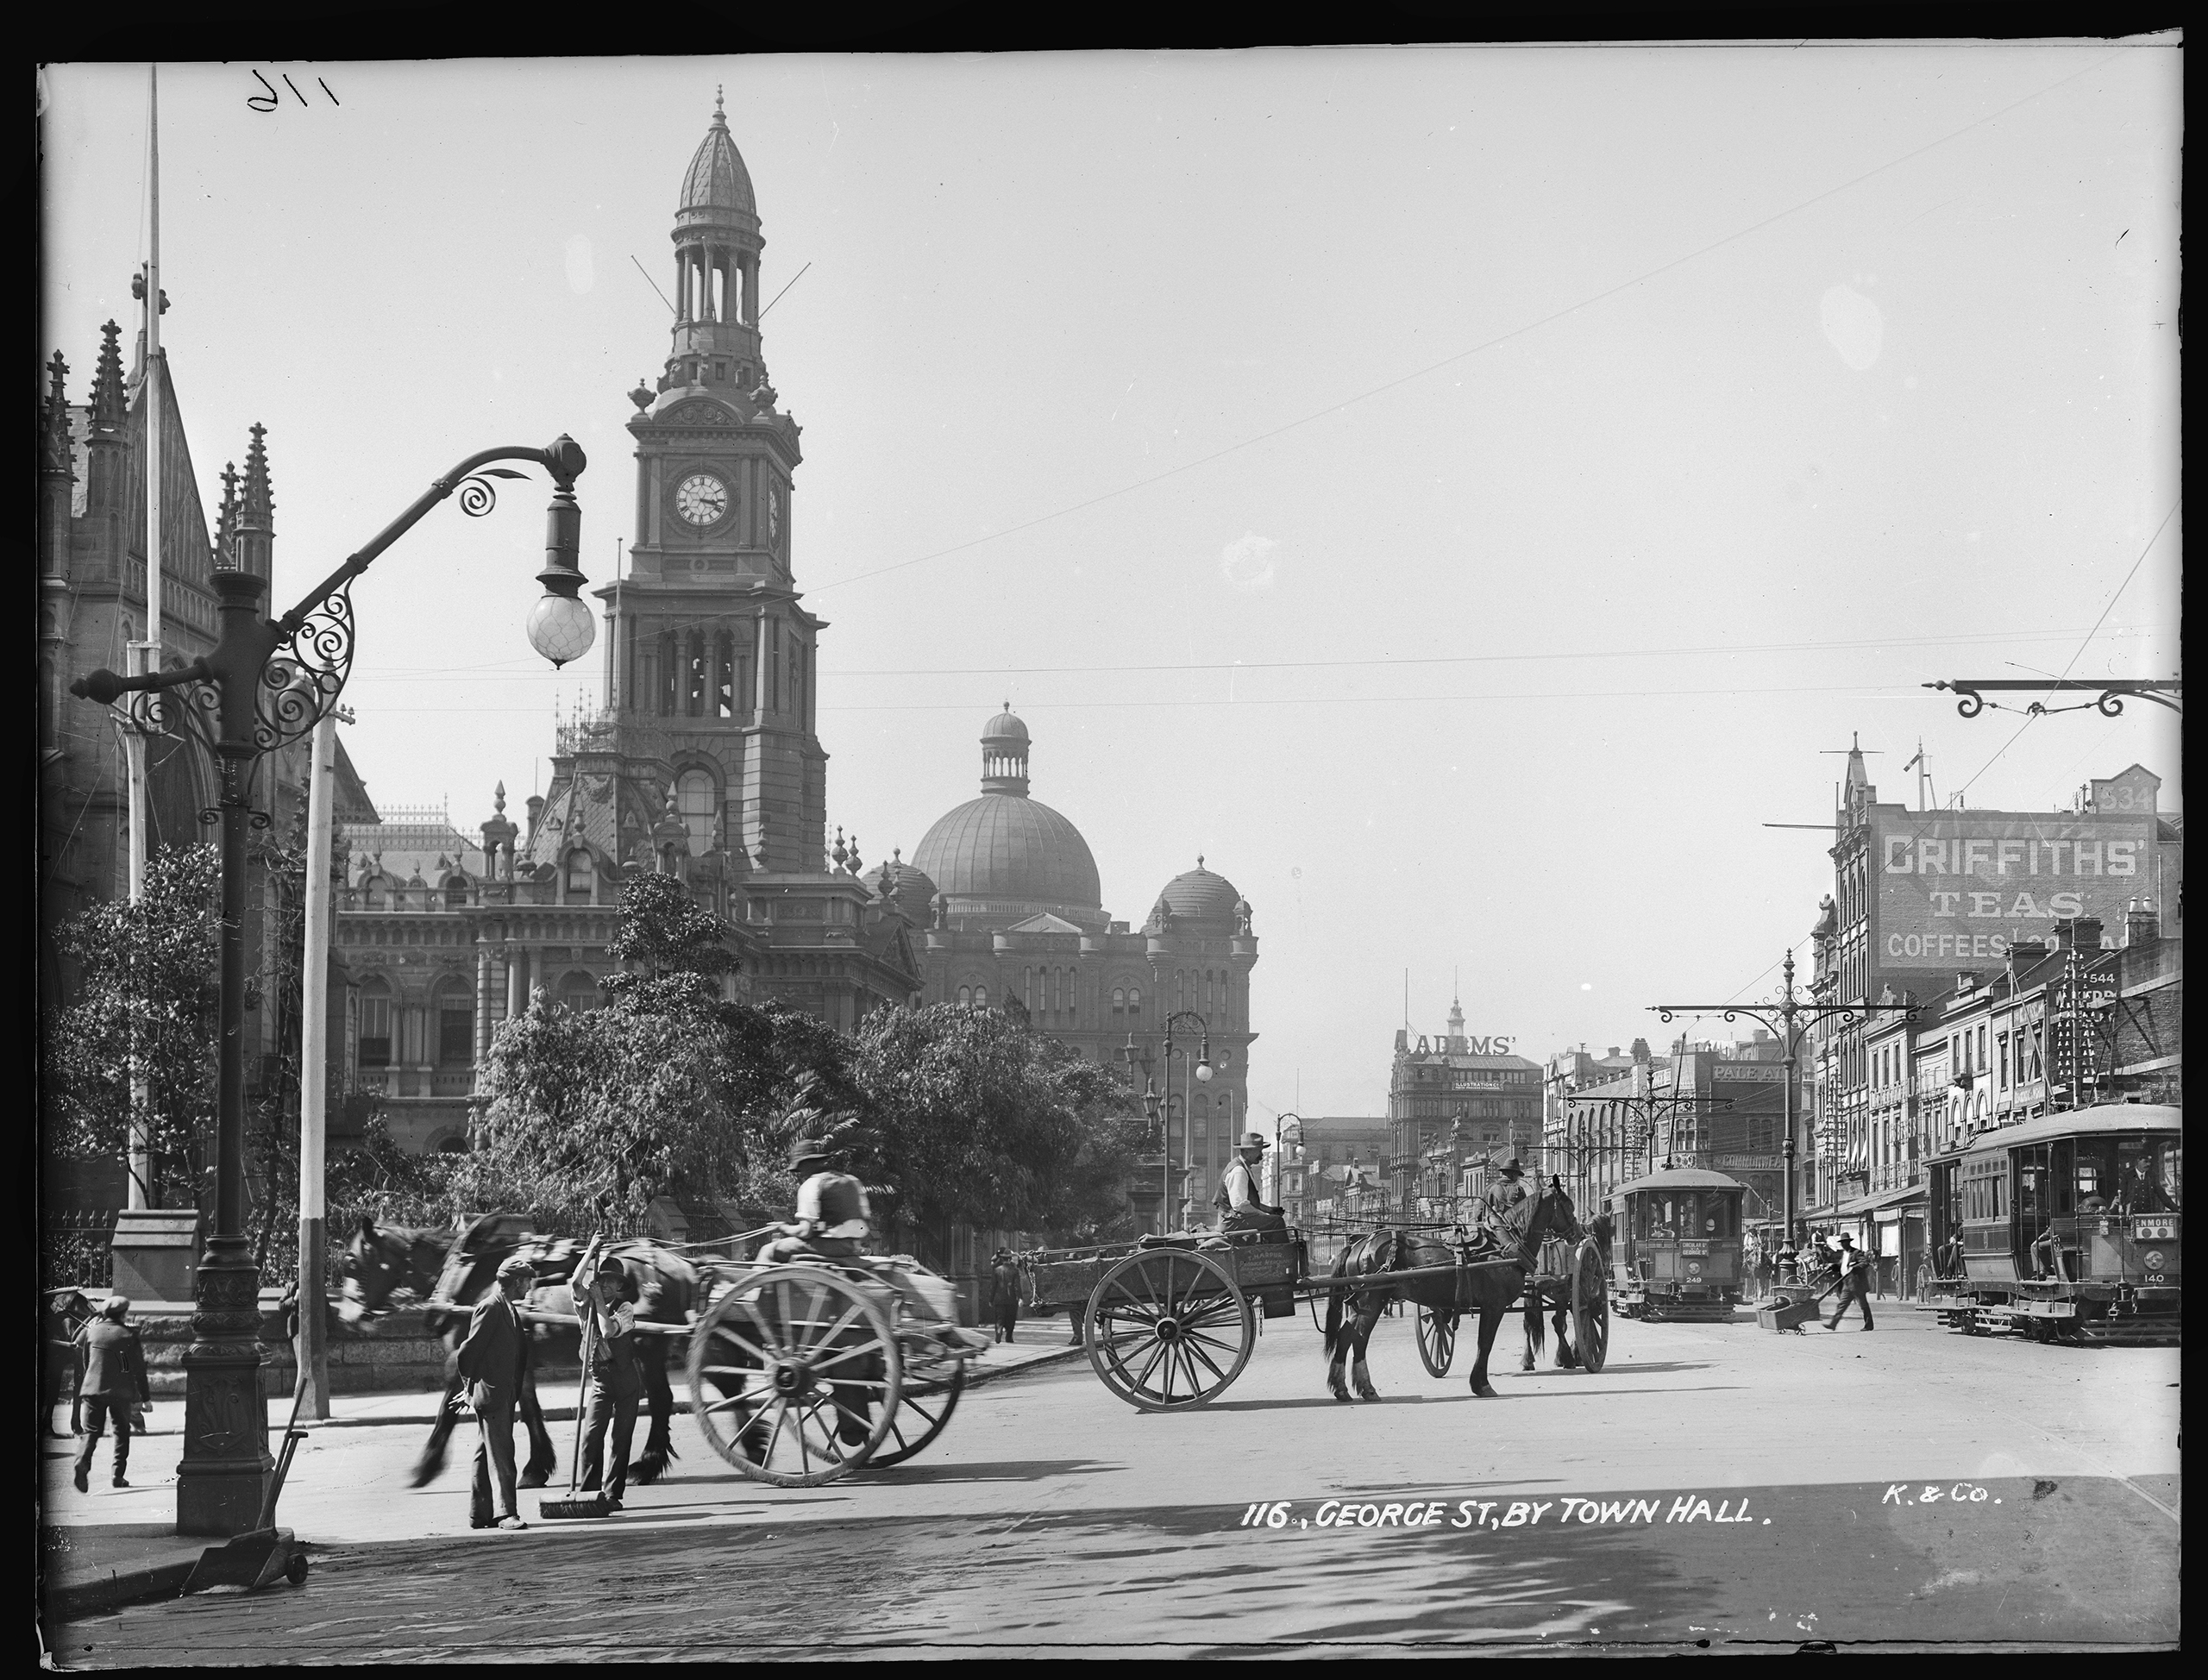 Glass plate negative of George Street, Sydney, showing Sydney Town Hall and early electric street lighting, c.1904-1917